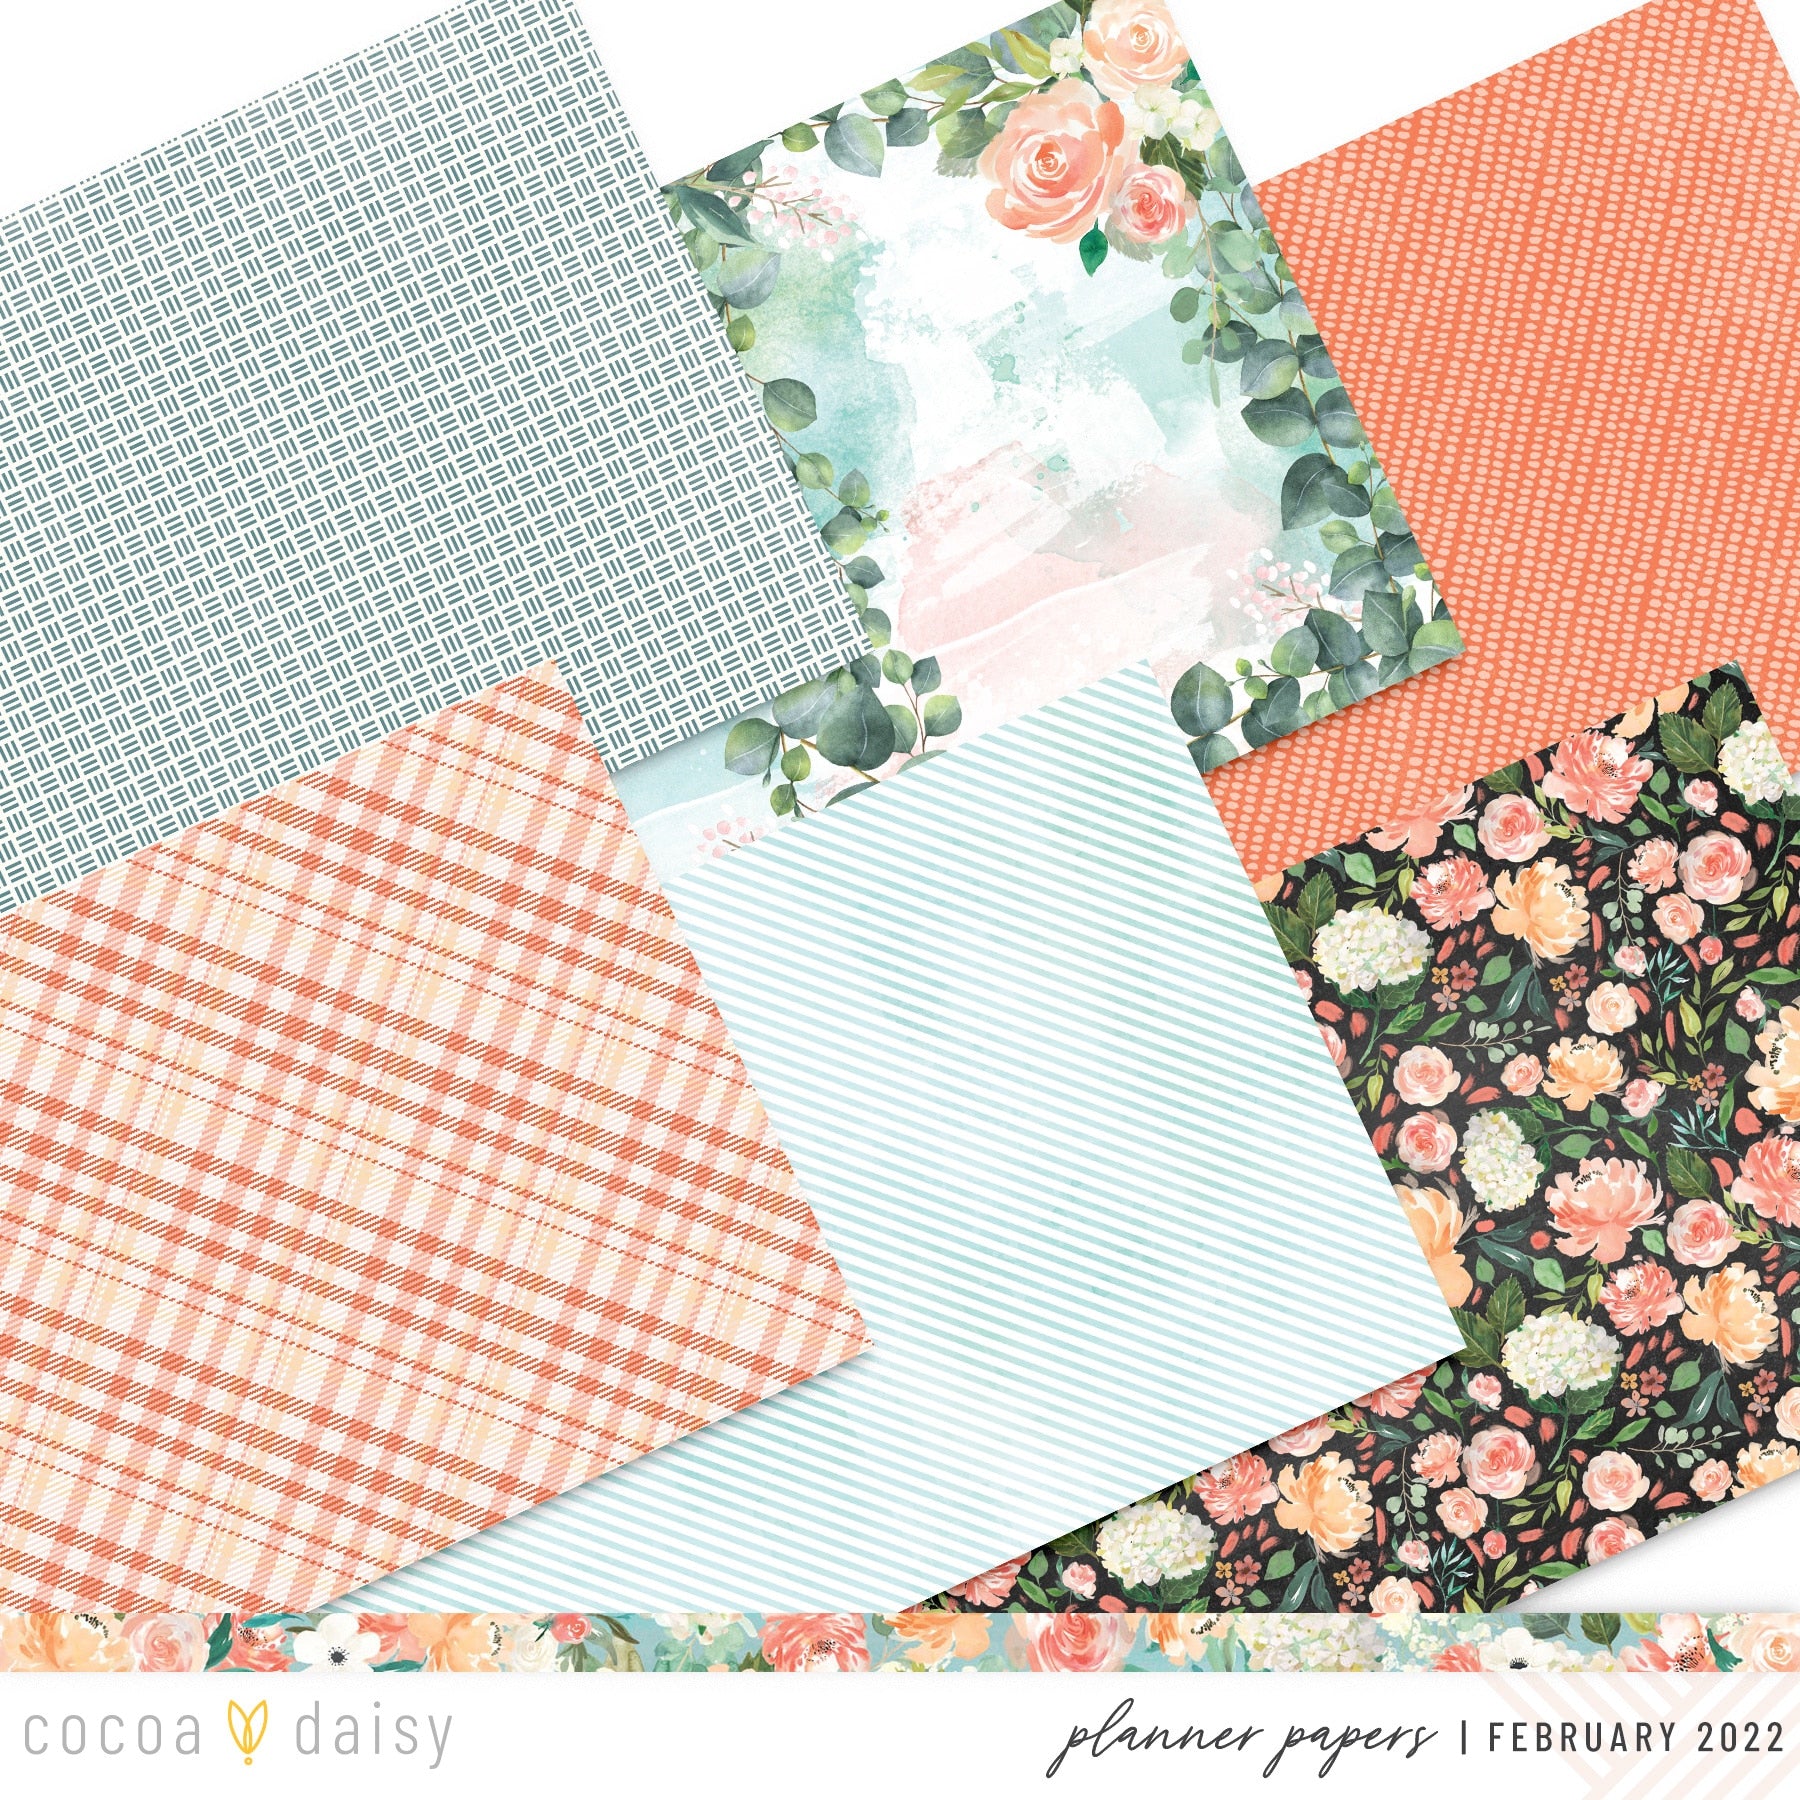 Elegance Blooms Extra Papers from Planner Kits February 2022